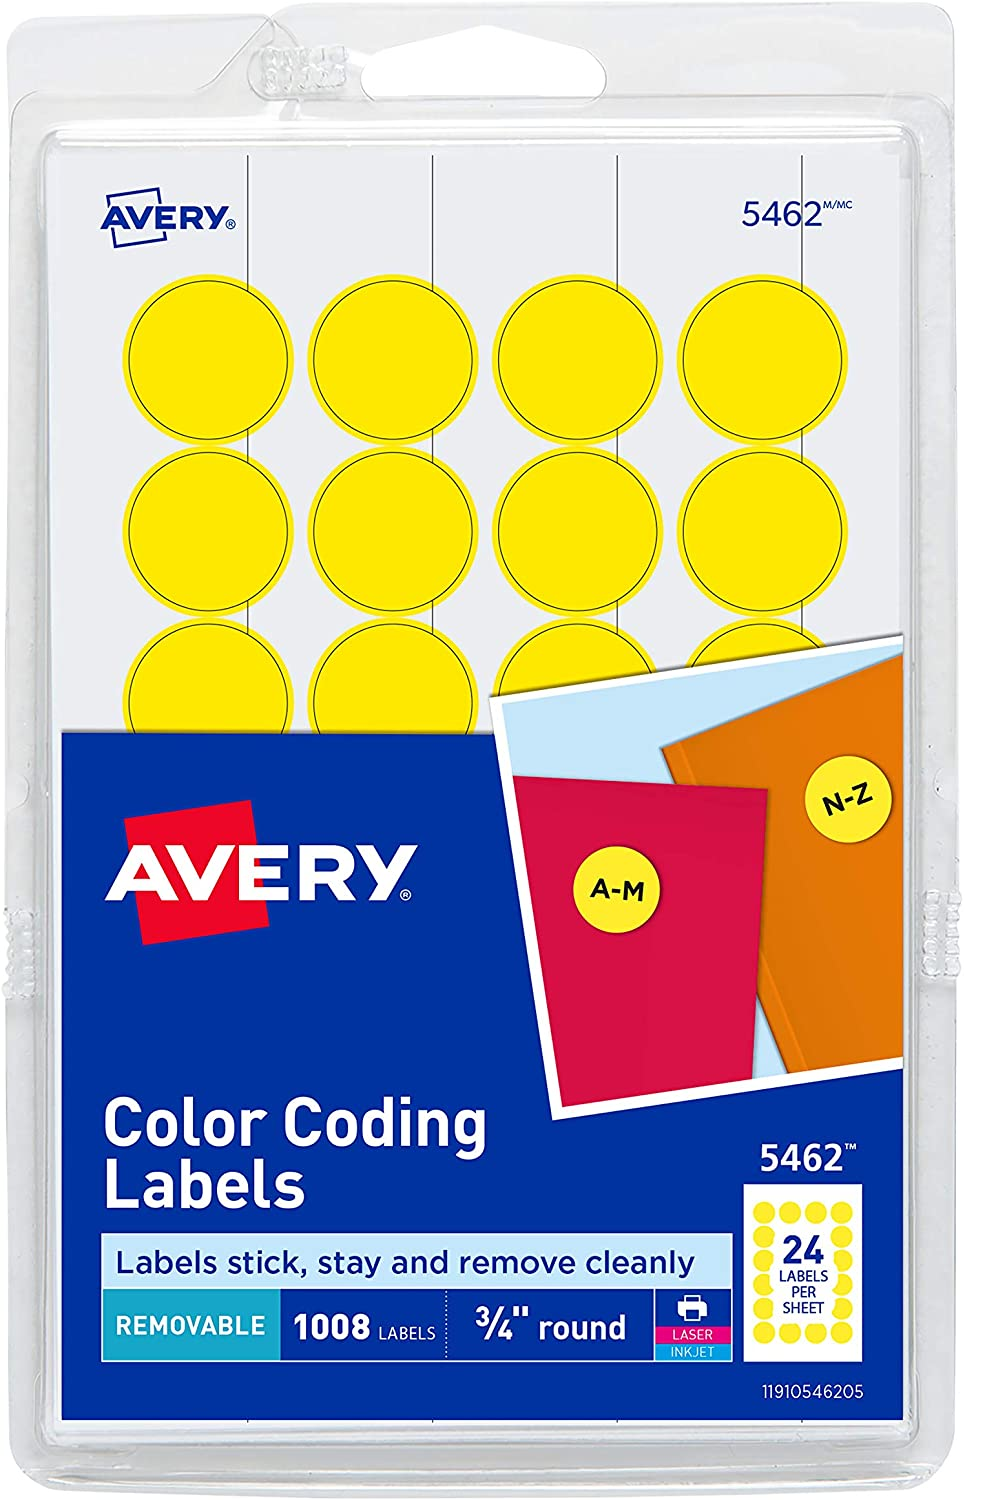 Dymo LV-30256 12 Pack of Name Badge Labels 